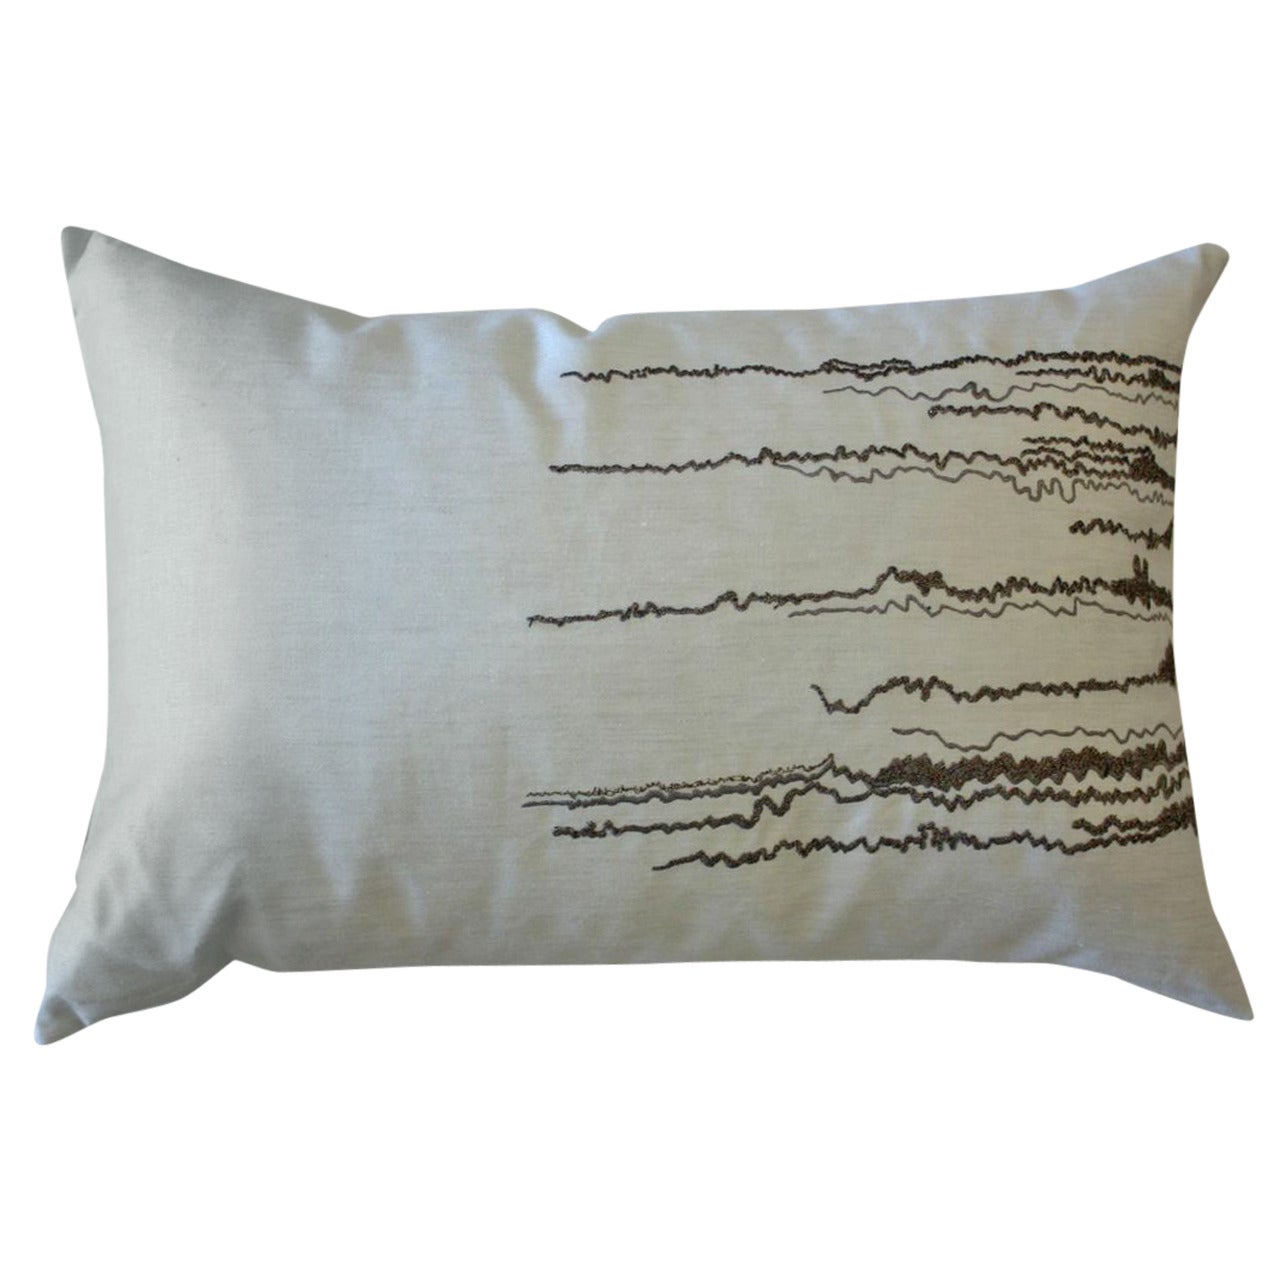 Emily Sumers Studio Line Waterfall Embroidery Pillow For Sale